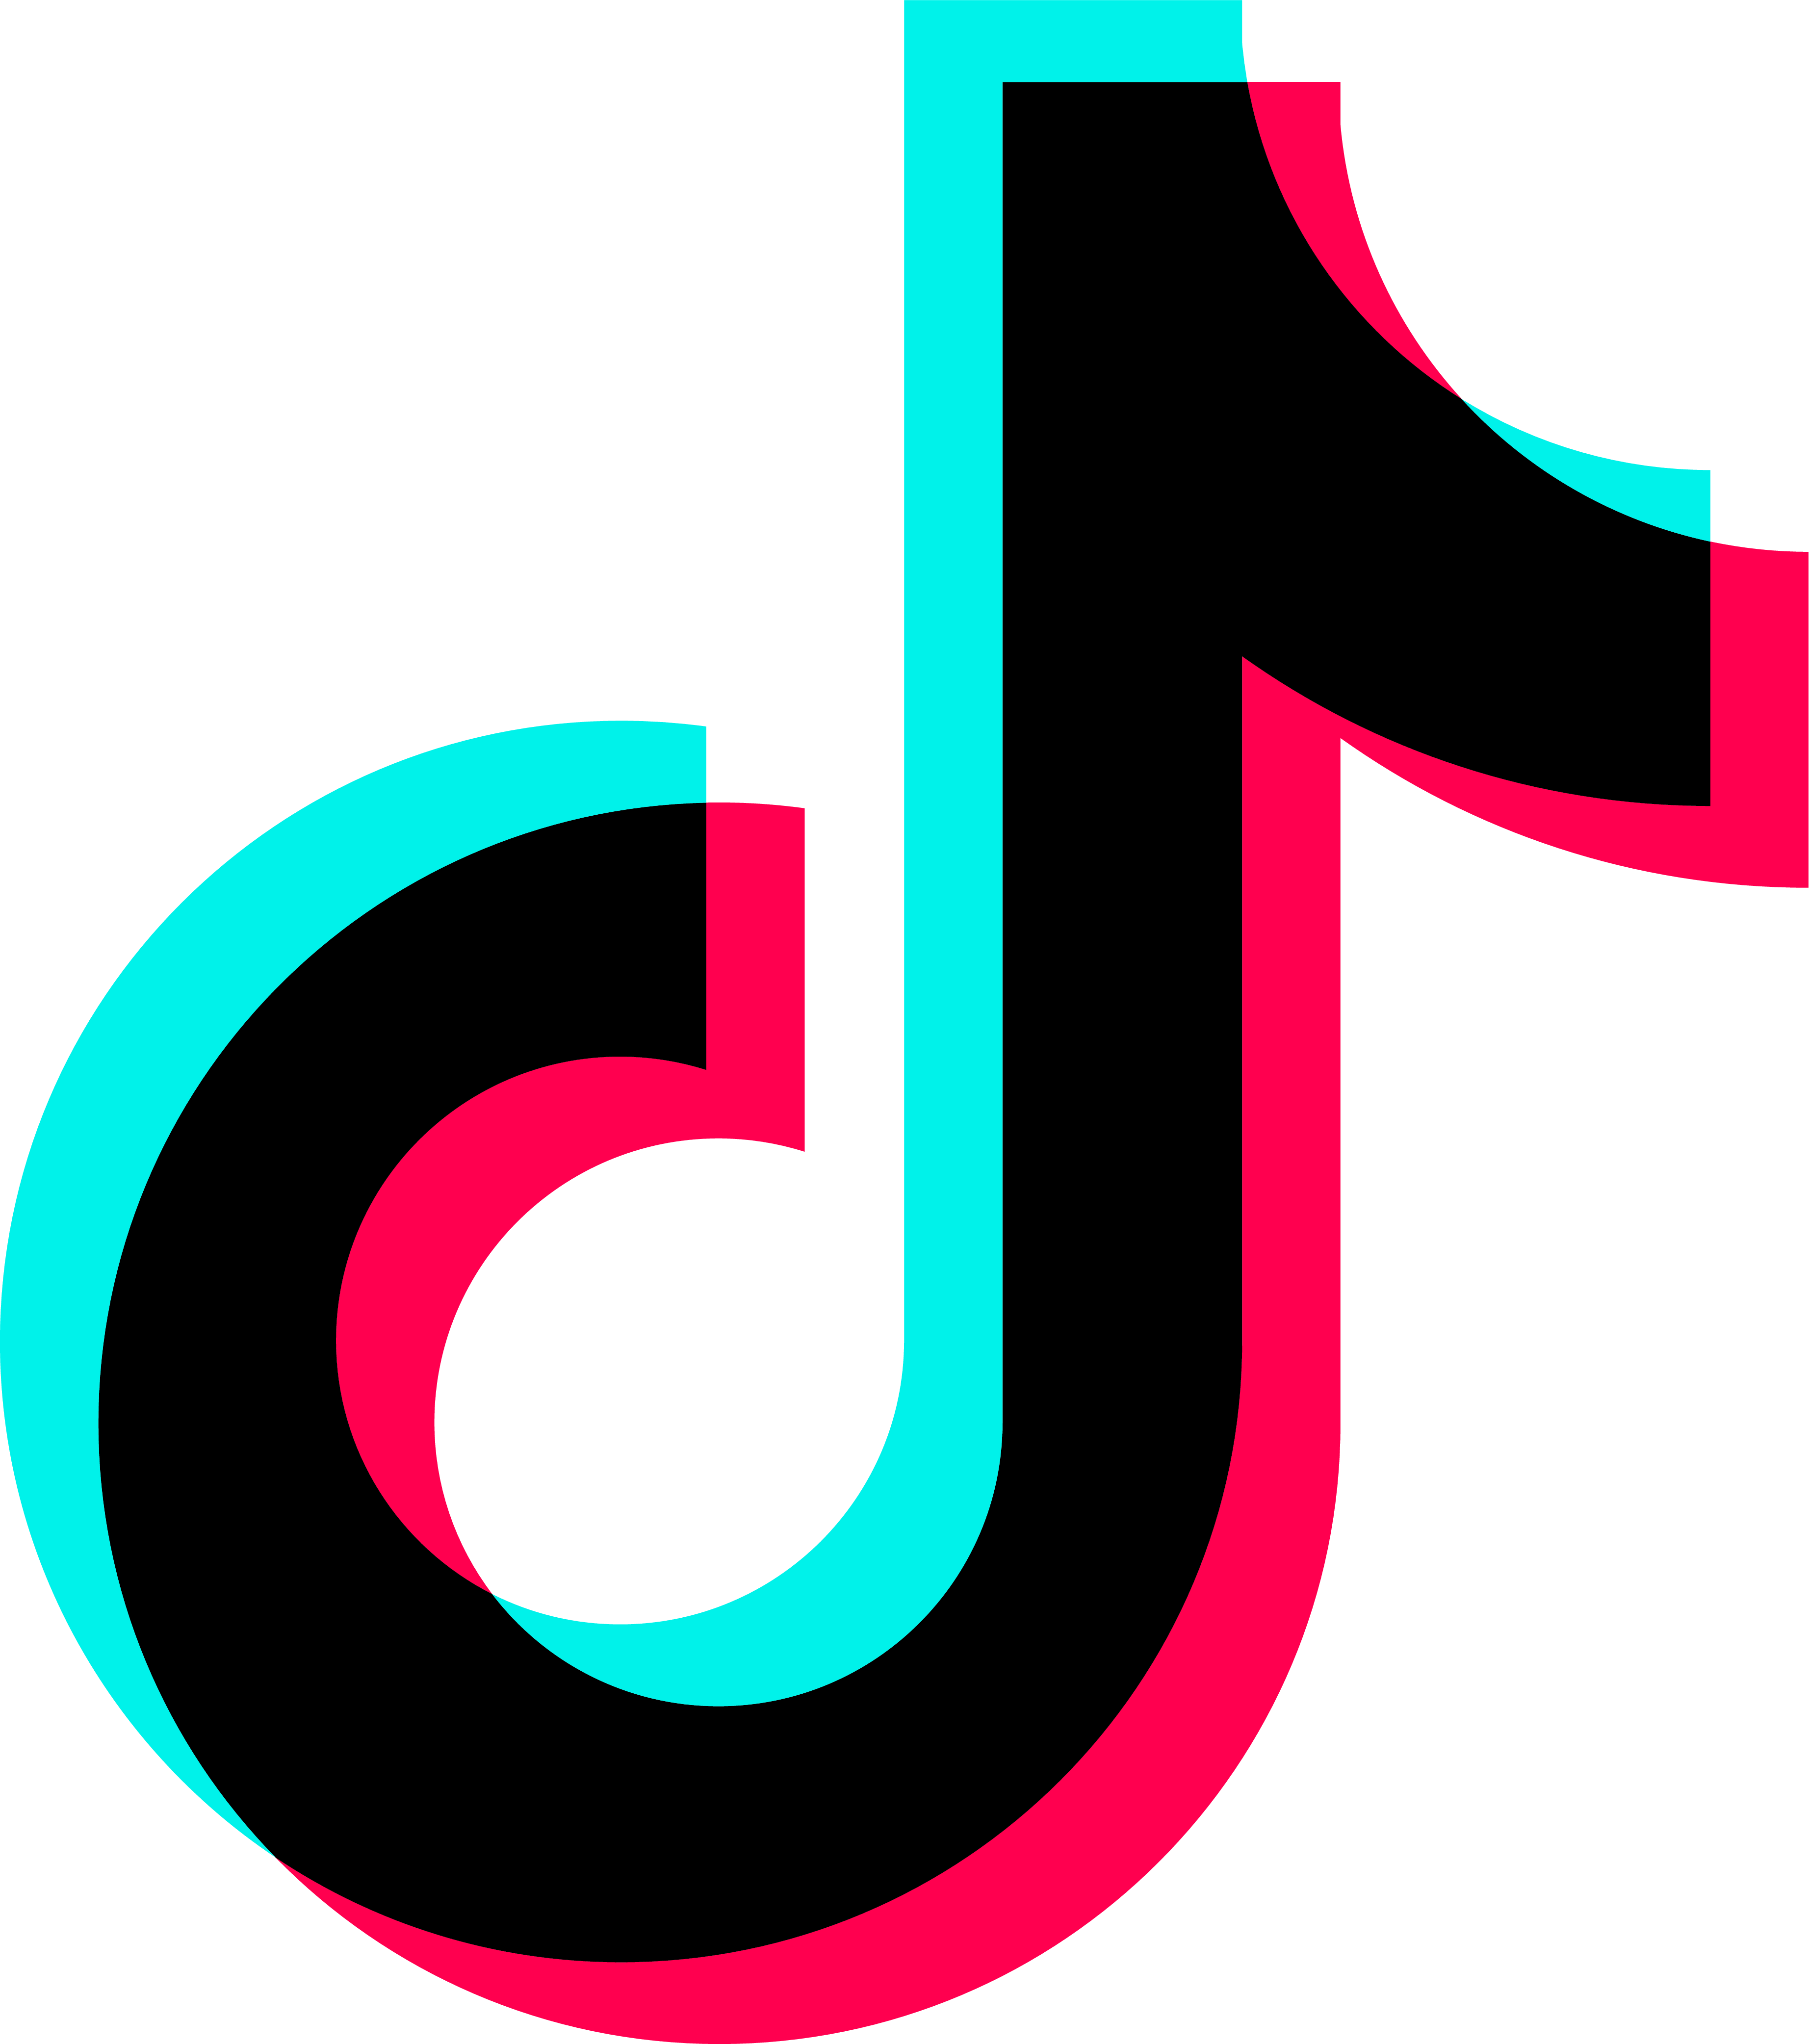 TikTok Logo PNG HD Image - PNG All | PNG All